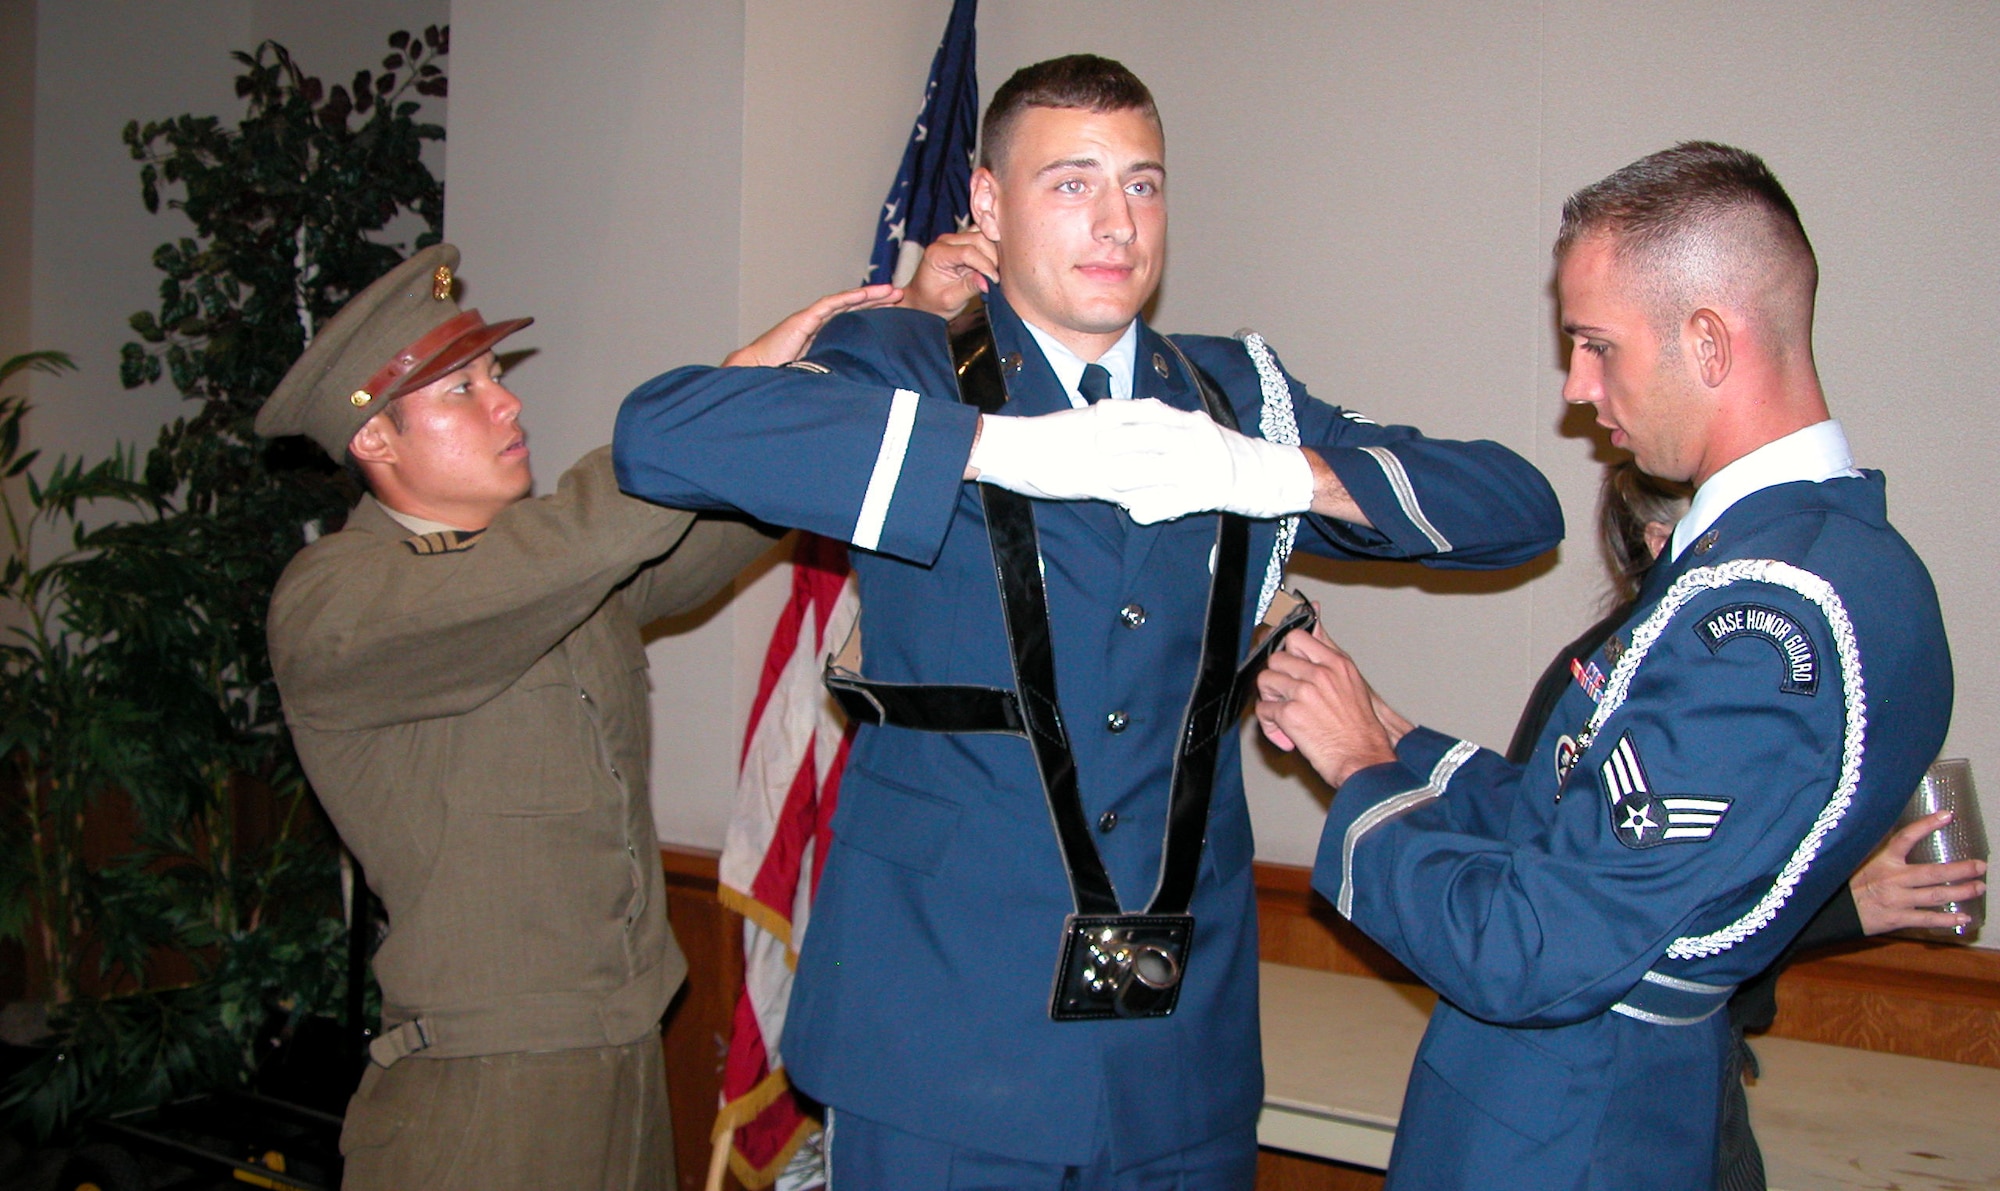 From left, Senior Airman Isaiah Hiapo, Airman 1st Class Walter Woods, and Senior Airman Richard Middlebrook prepare for the Pageant of Flags at the Air Force Ball
Sept. 15 at the Glendale Civic Center. Airman Hiapo was dressed in a heritage uniform. Uniforms from as far back as the American Revolution were worn by Airmen during the ball. More than 600 people attended the event commemorating the Air Force's 60th birthday. (Photo by Capt. Miki Gilloon)